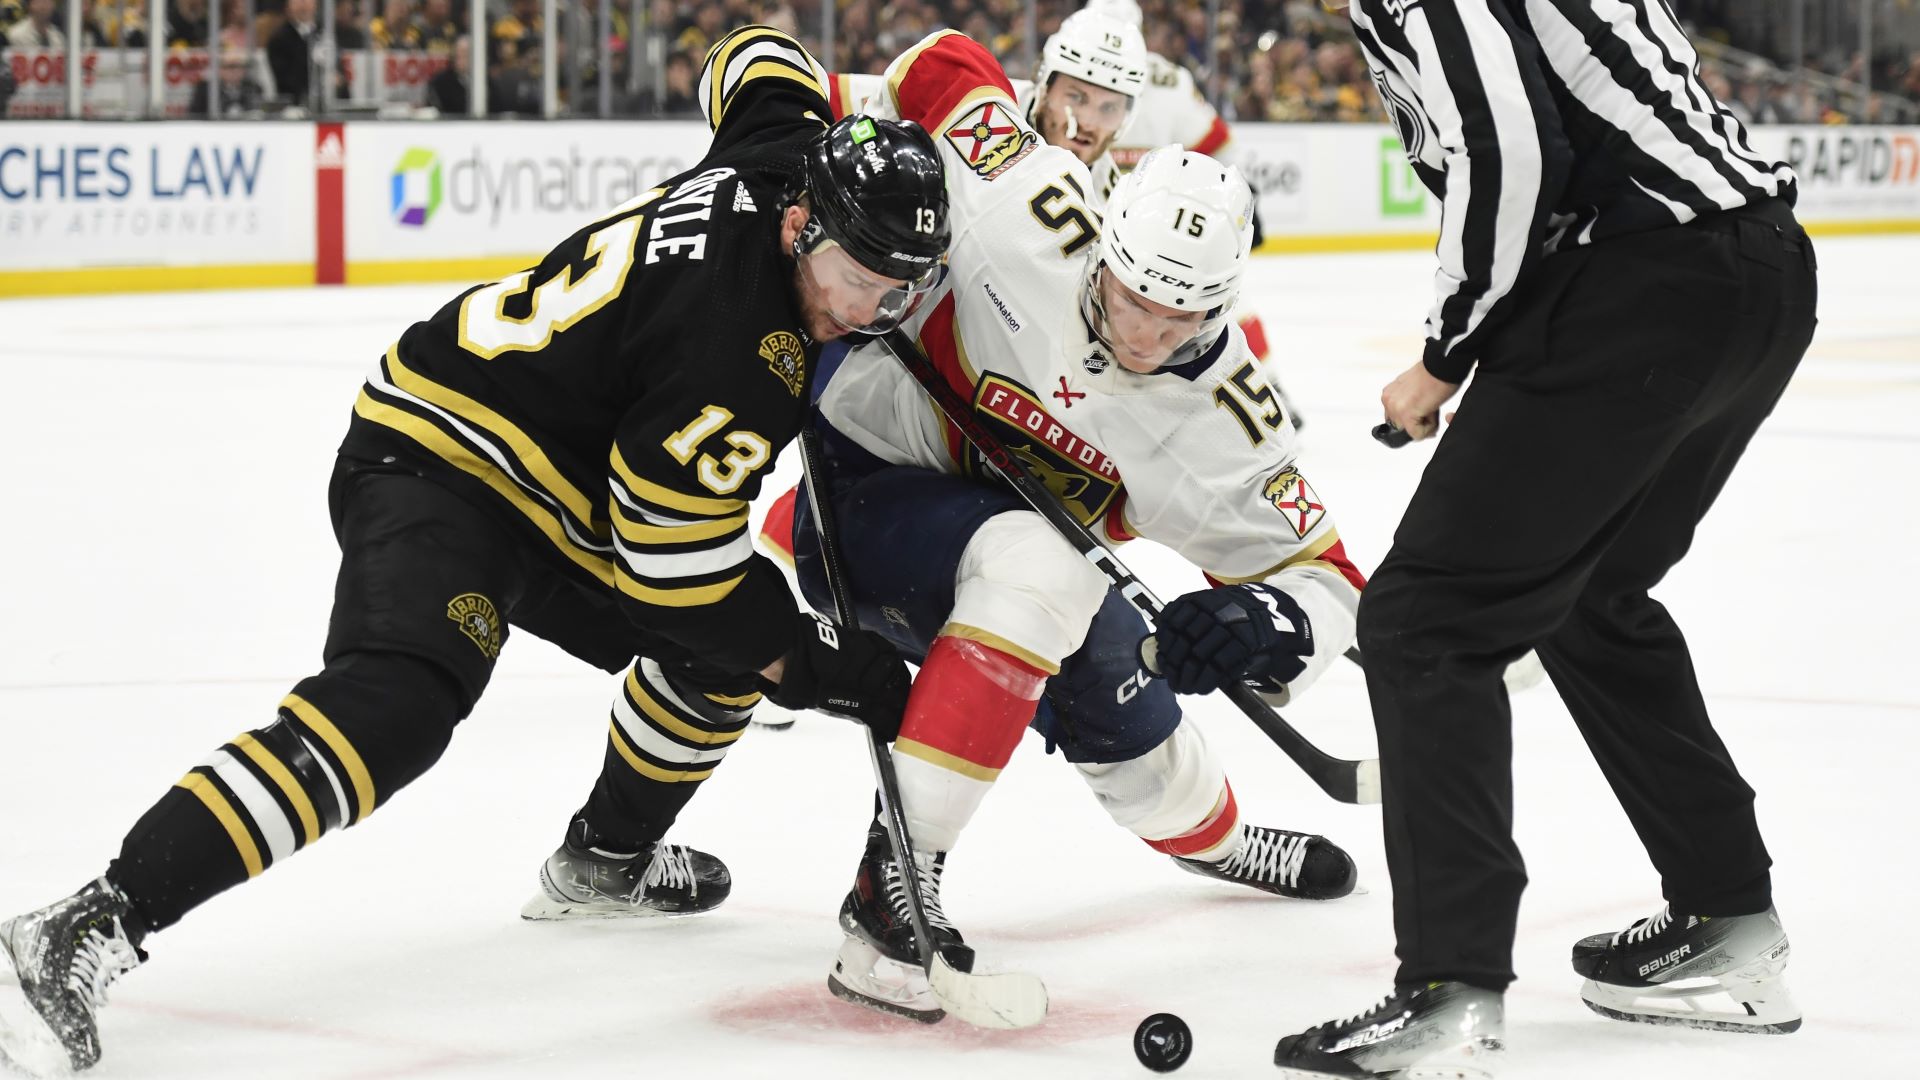 Bruins Wrap: Heartbreaking Game 6 Loss To Panthers Ends Boston’s
Season